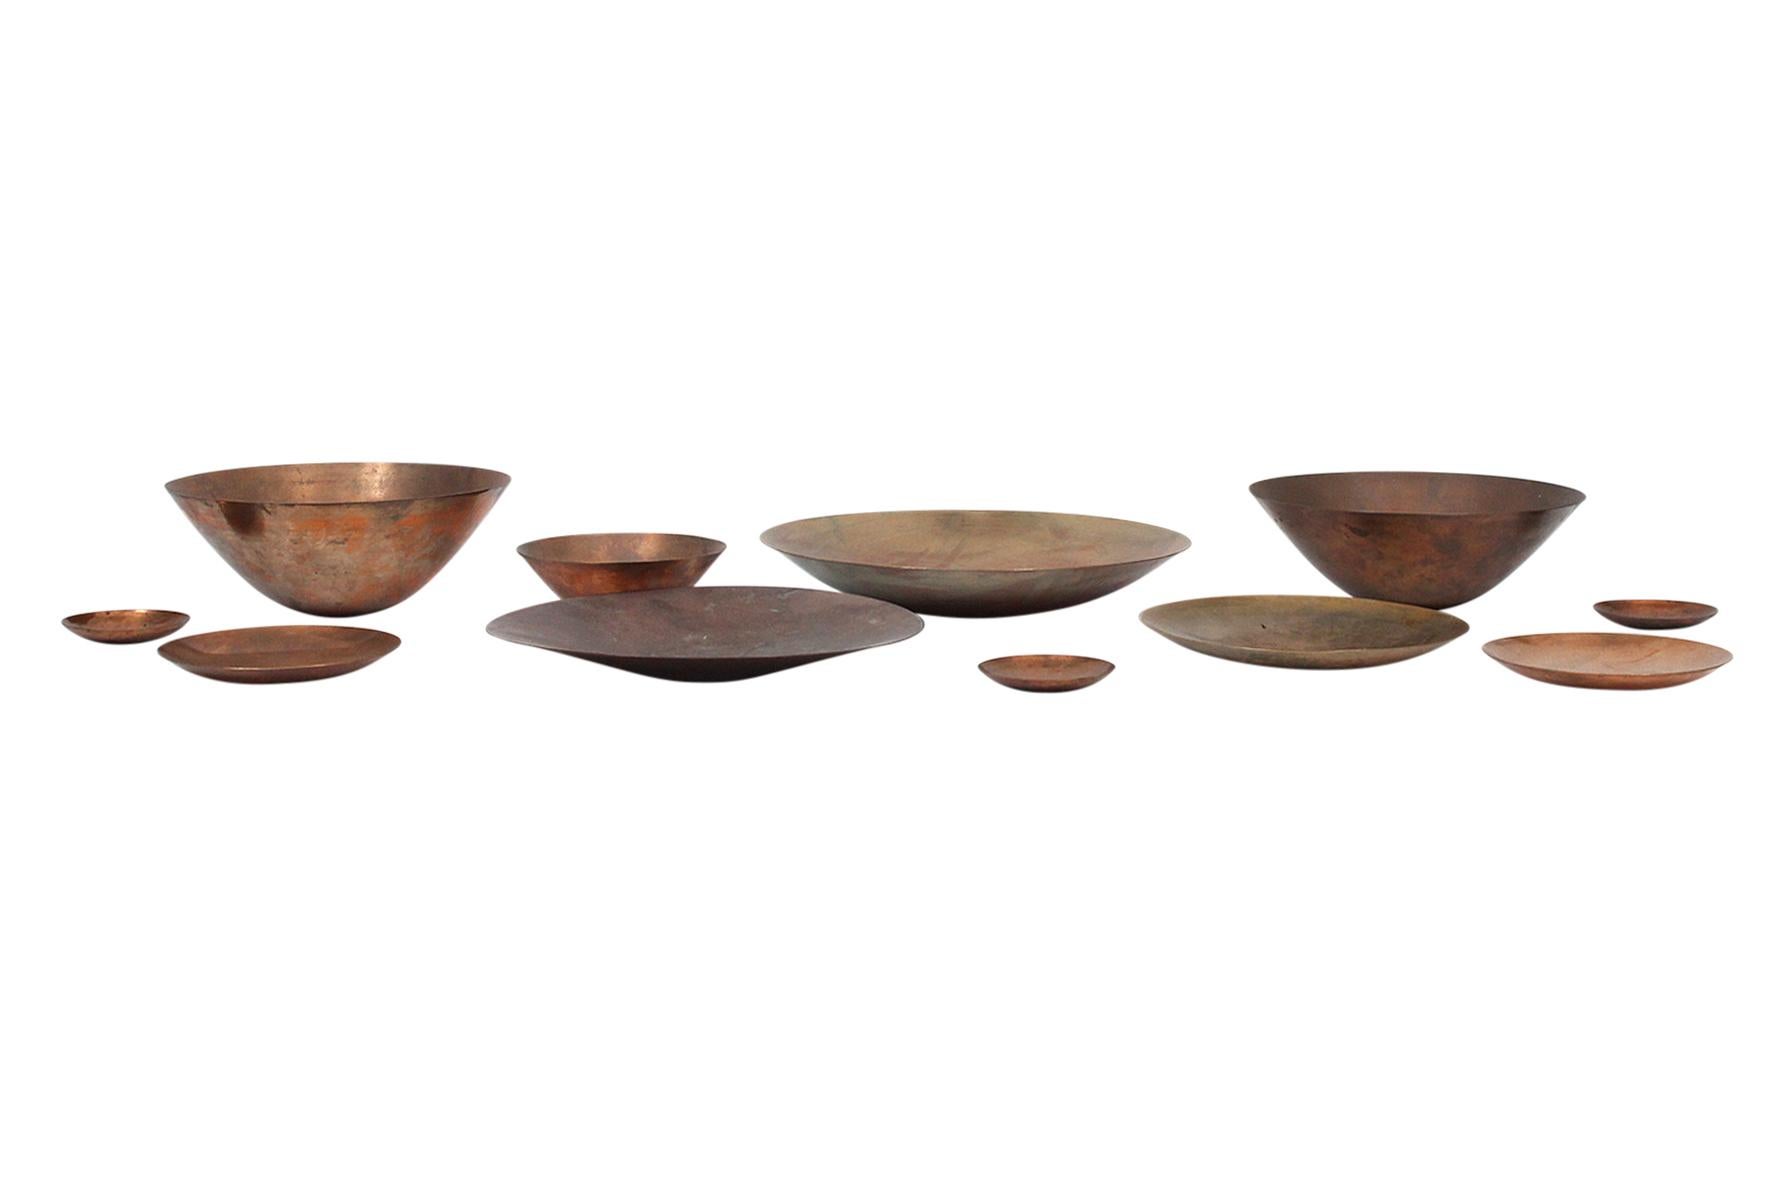 American Rare Collection of Spun Vessels by Ronald Hayes Pearson